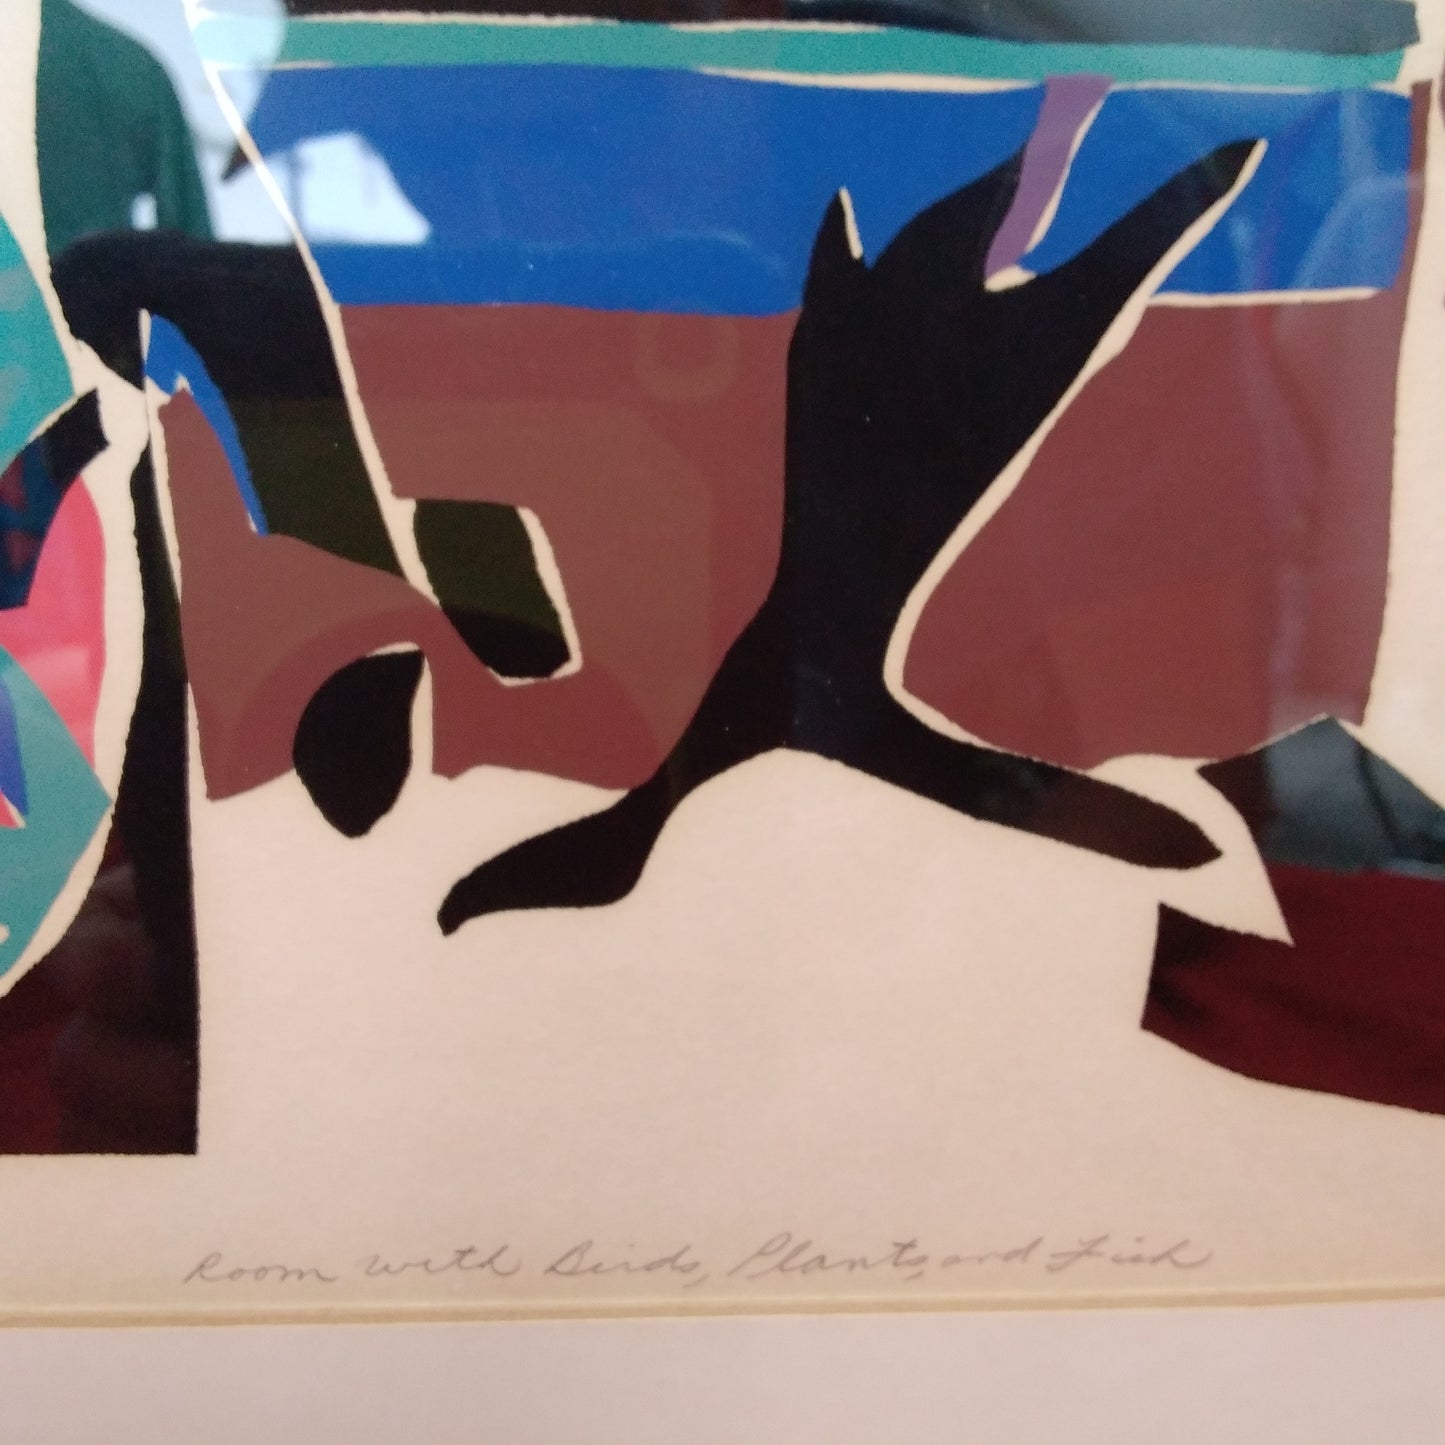 1979 Nan Hass Feldman "Room with Birds, Plants, and fish" Signed Serigraph #3/22